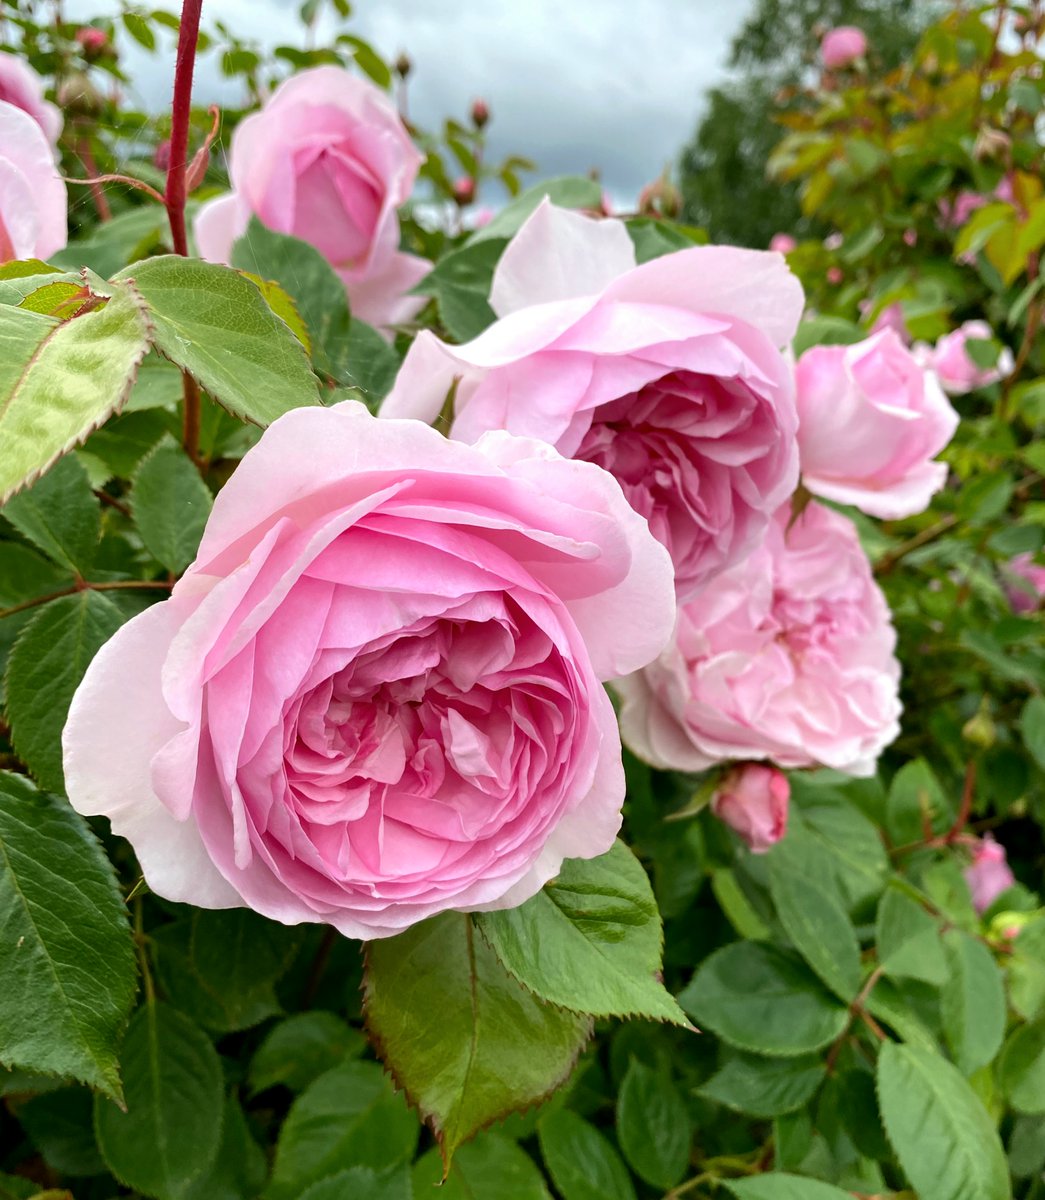 Brighten up your garden with potted roses, the perfect addition for flower enthusiasts and garden lovers alike. Shop now and enjoy the beauty and fragrance of these timeless blooms. 
Princess Charlene of Monaco, Wollerton Old Hall, and Olivia Rose Austin.
#PottedRoses #Garderlove